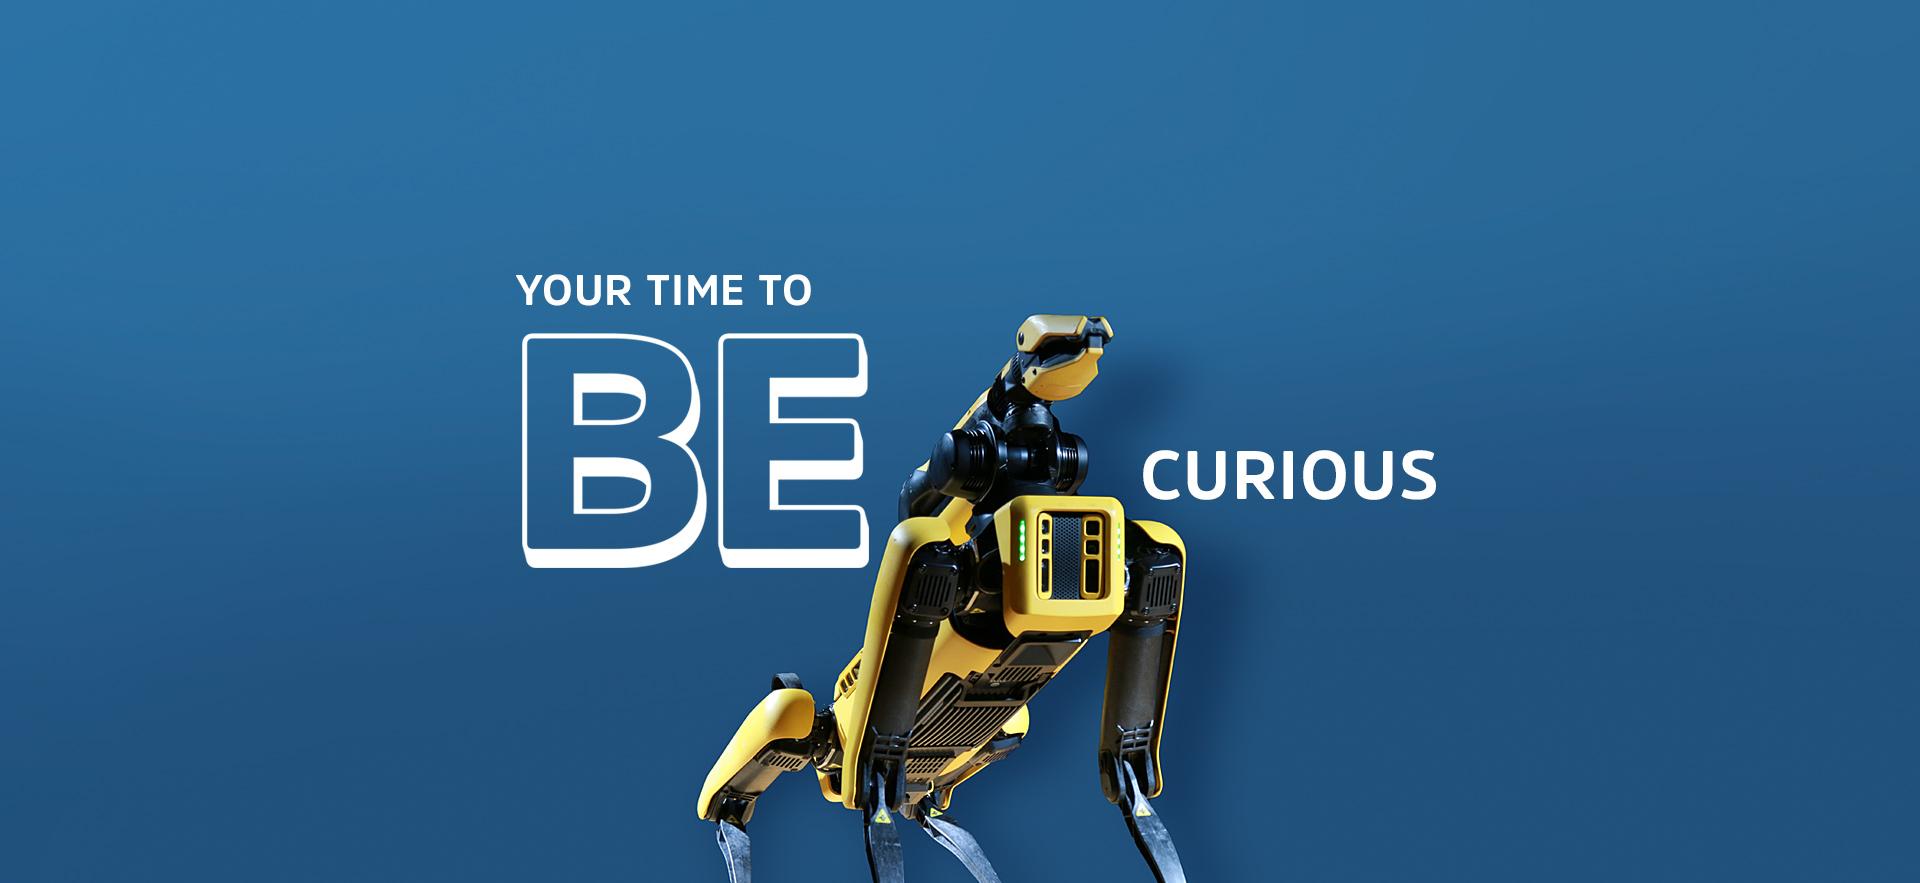 Spot for Engineering and Robotics posed between text YOUR TIME TO BE CURIOUS